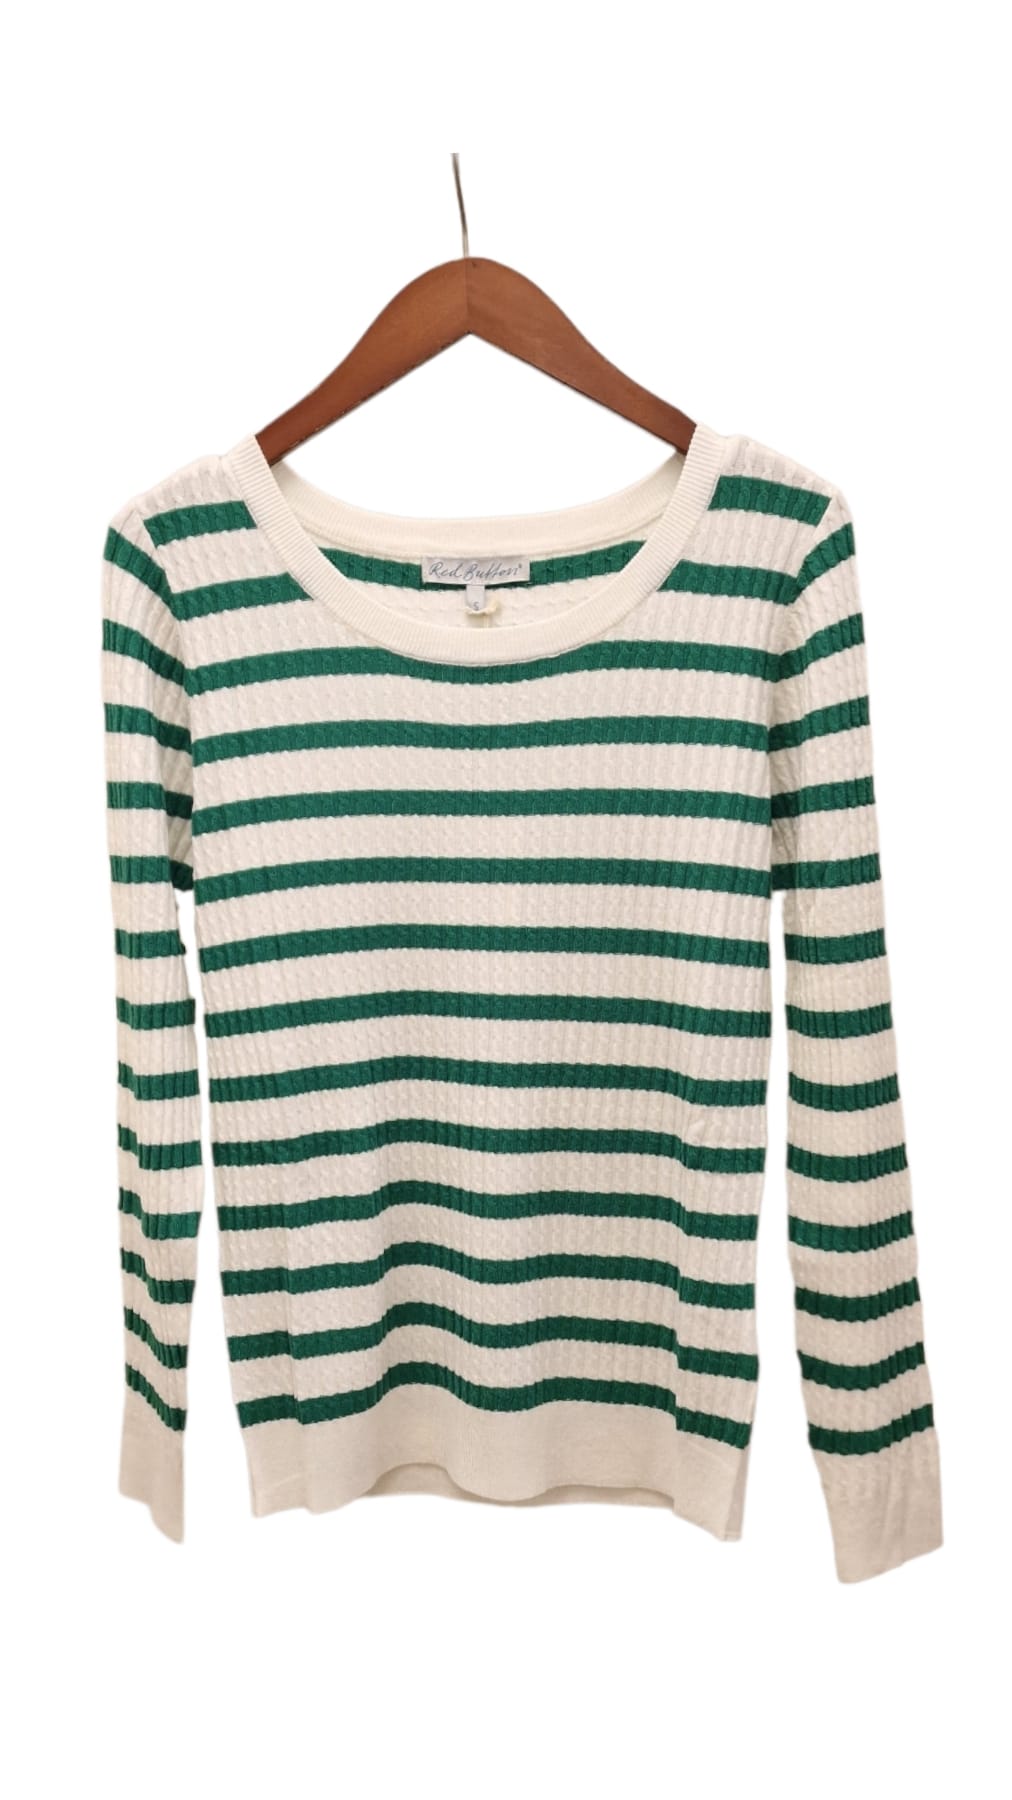 Red button Sweet cable stitch & stripe - Green